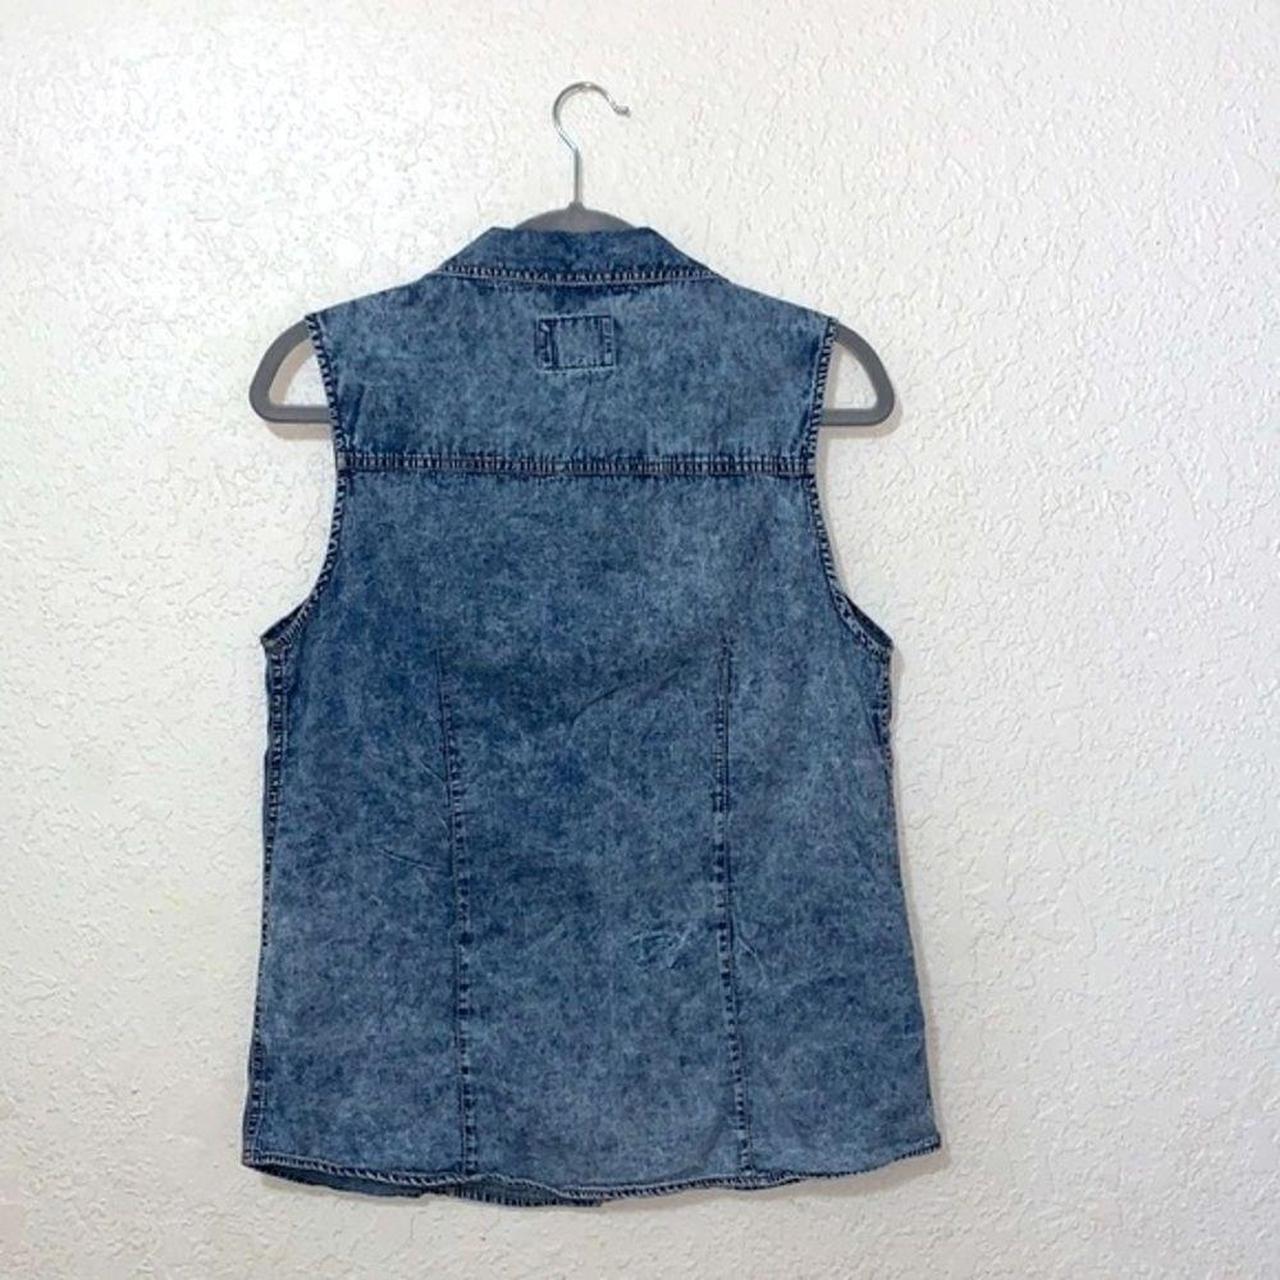 Product Image 2 - YMI button up vest. Lightweight